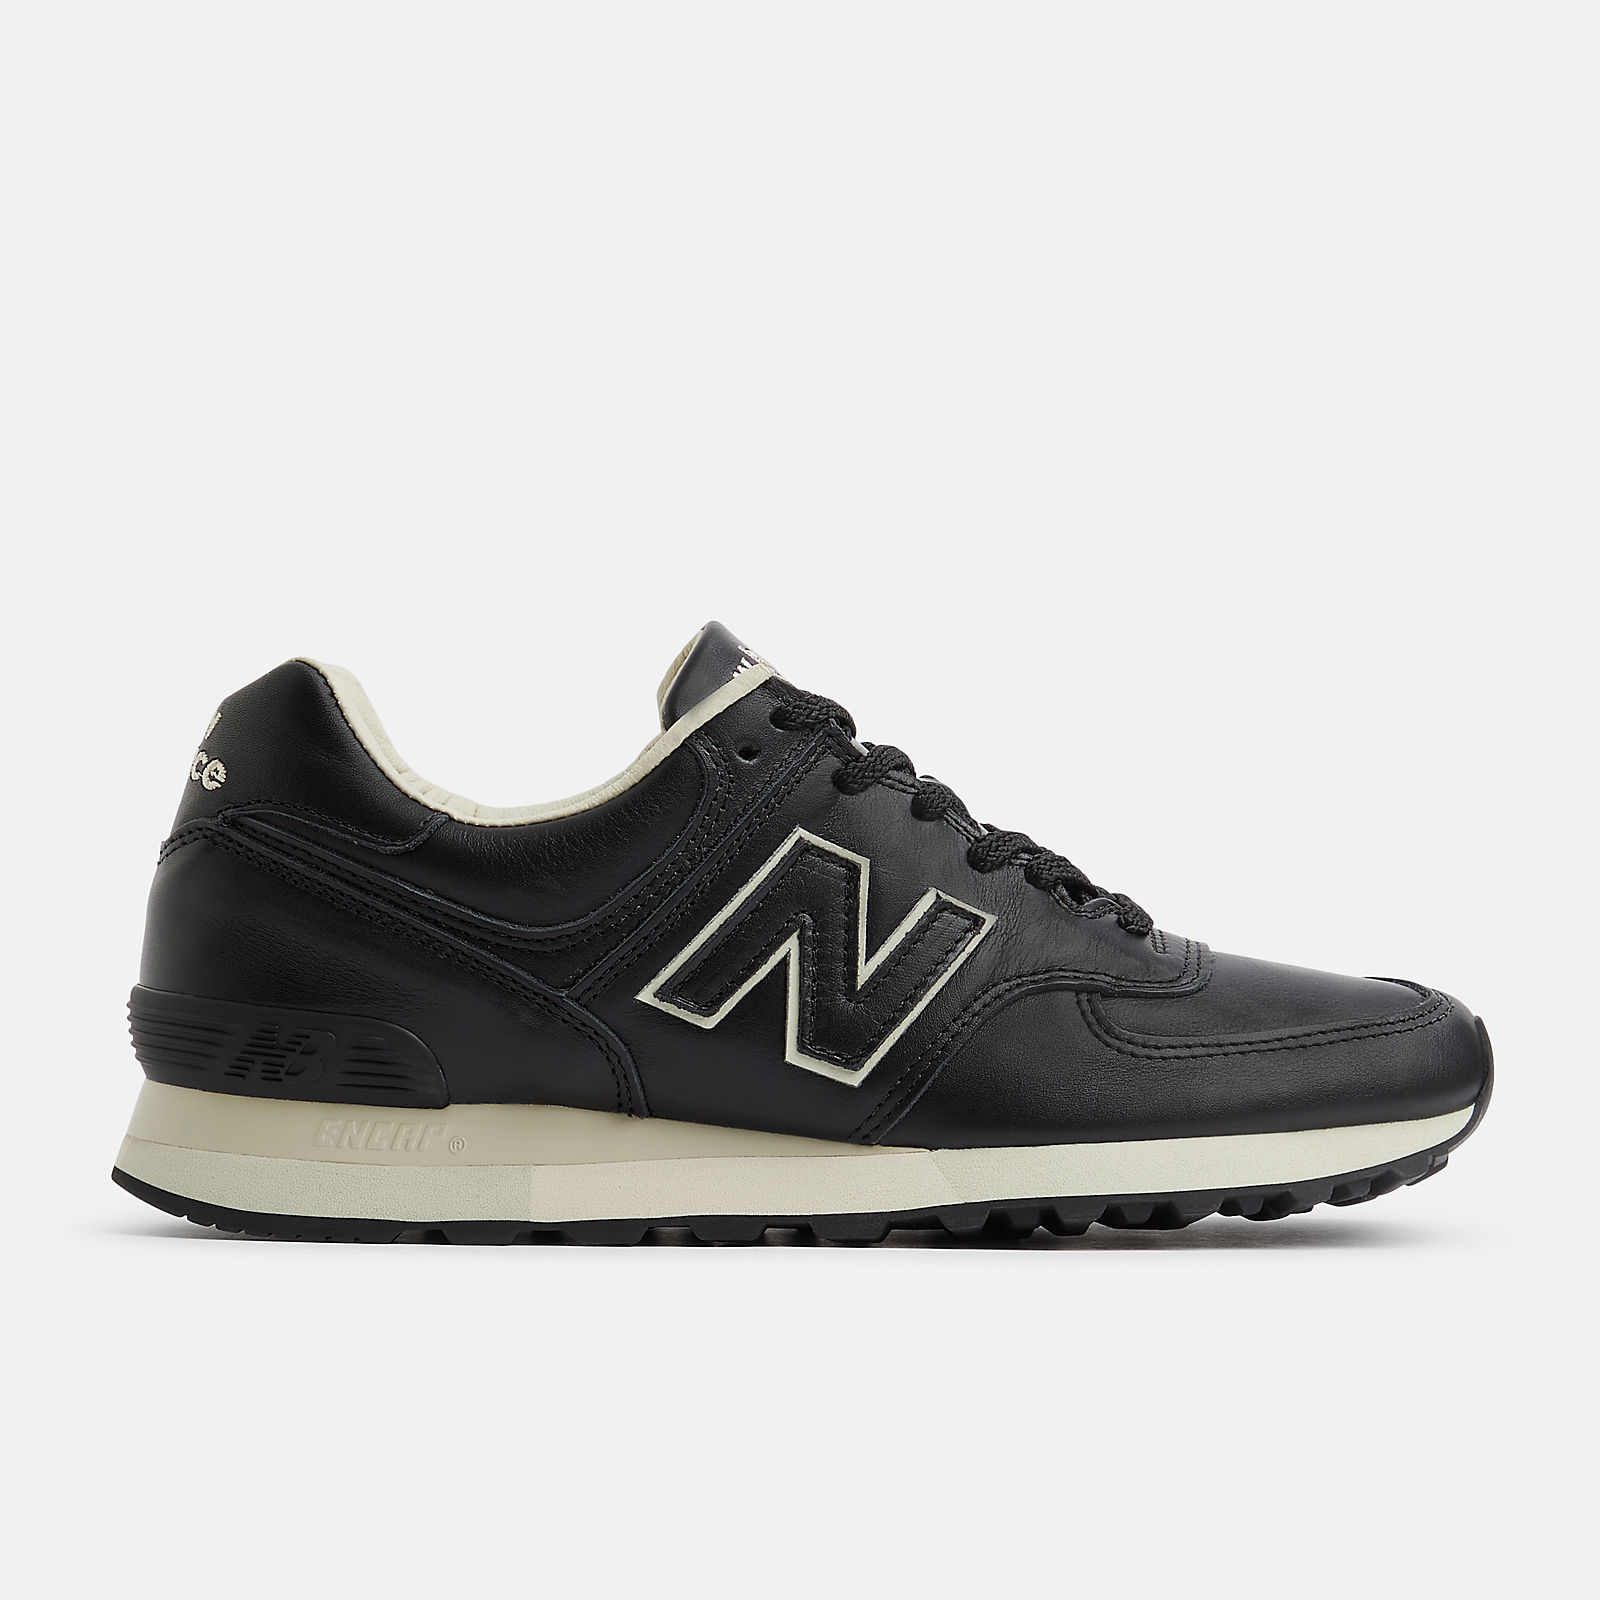 MADE in UK 576 - New Balance